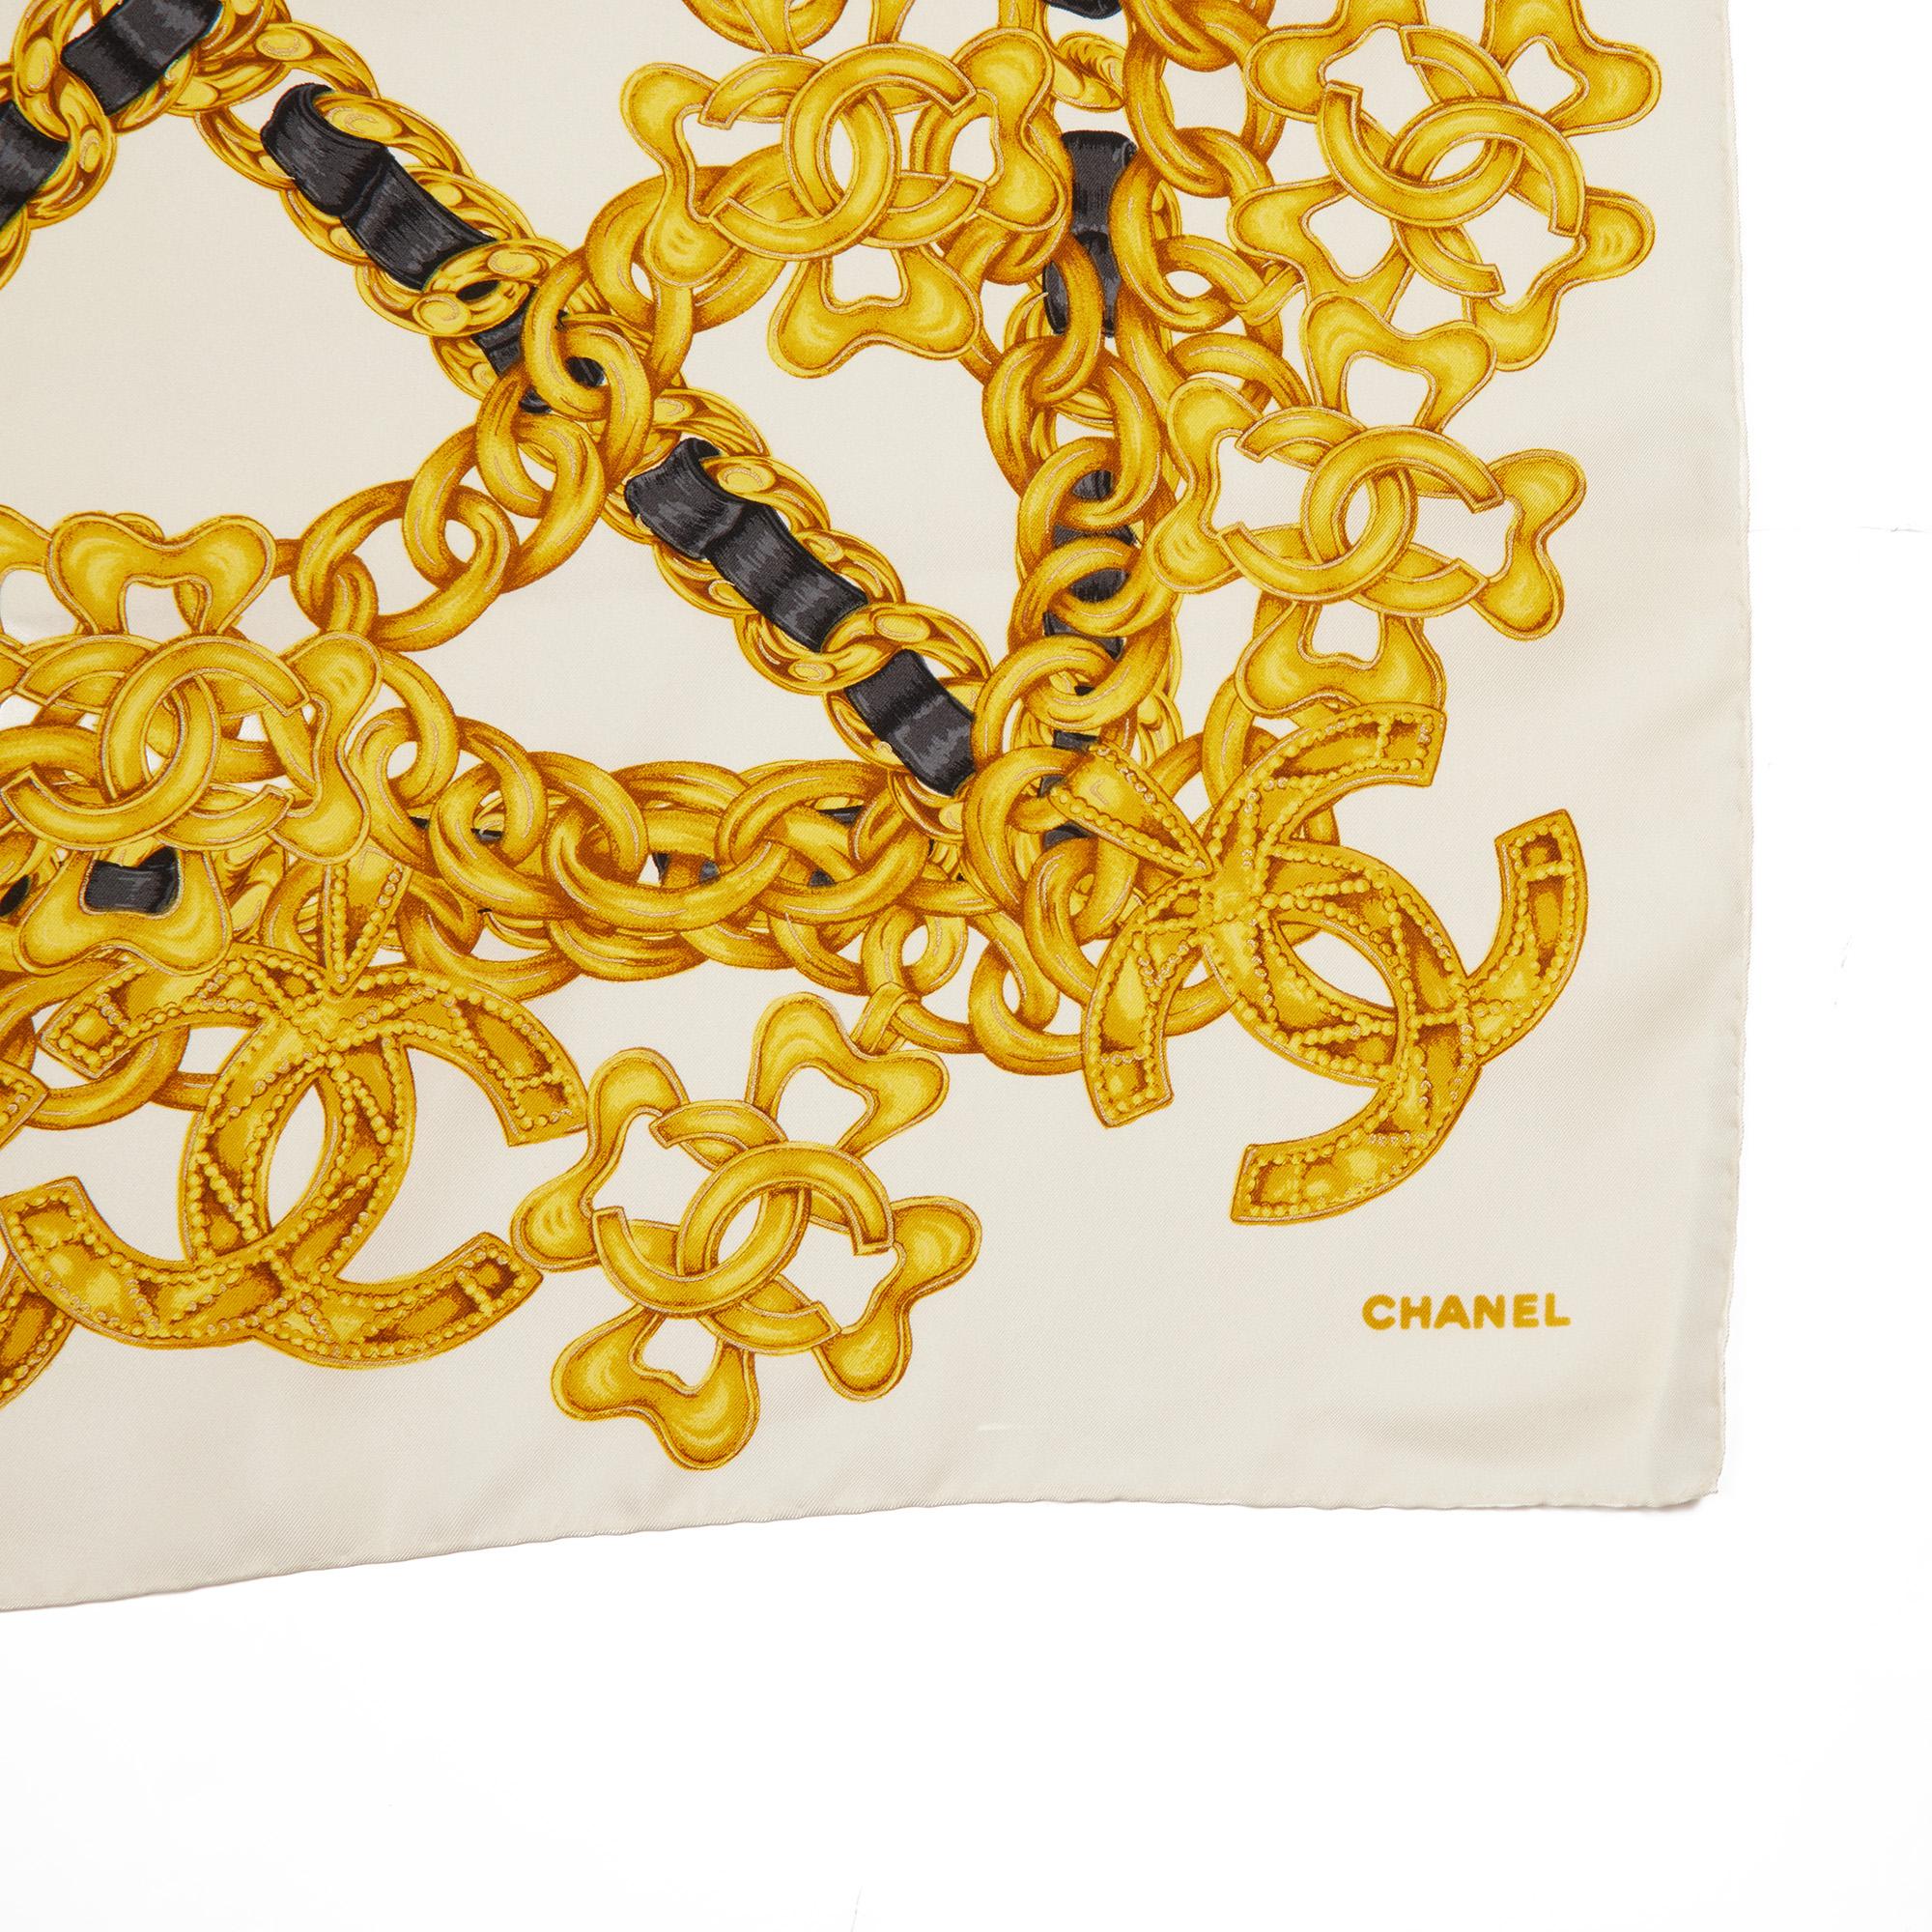 Chanel WHITE, GOLD & BLACK SILK VINTAGE CC CHAIN SCARF

CONDITION NOTES
The exterior is in excellent condition with minimal signs of use.
Overall this item is in excellent pre-owned condition. Please note the majority of the items we sell are